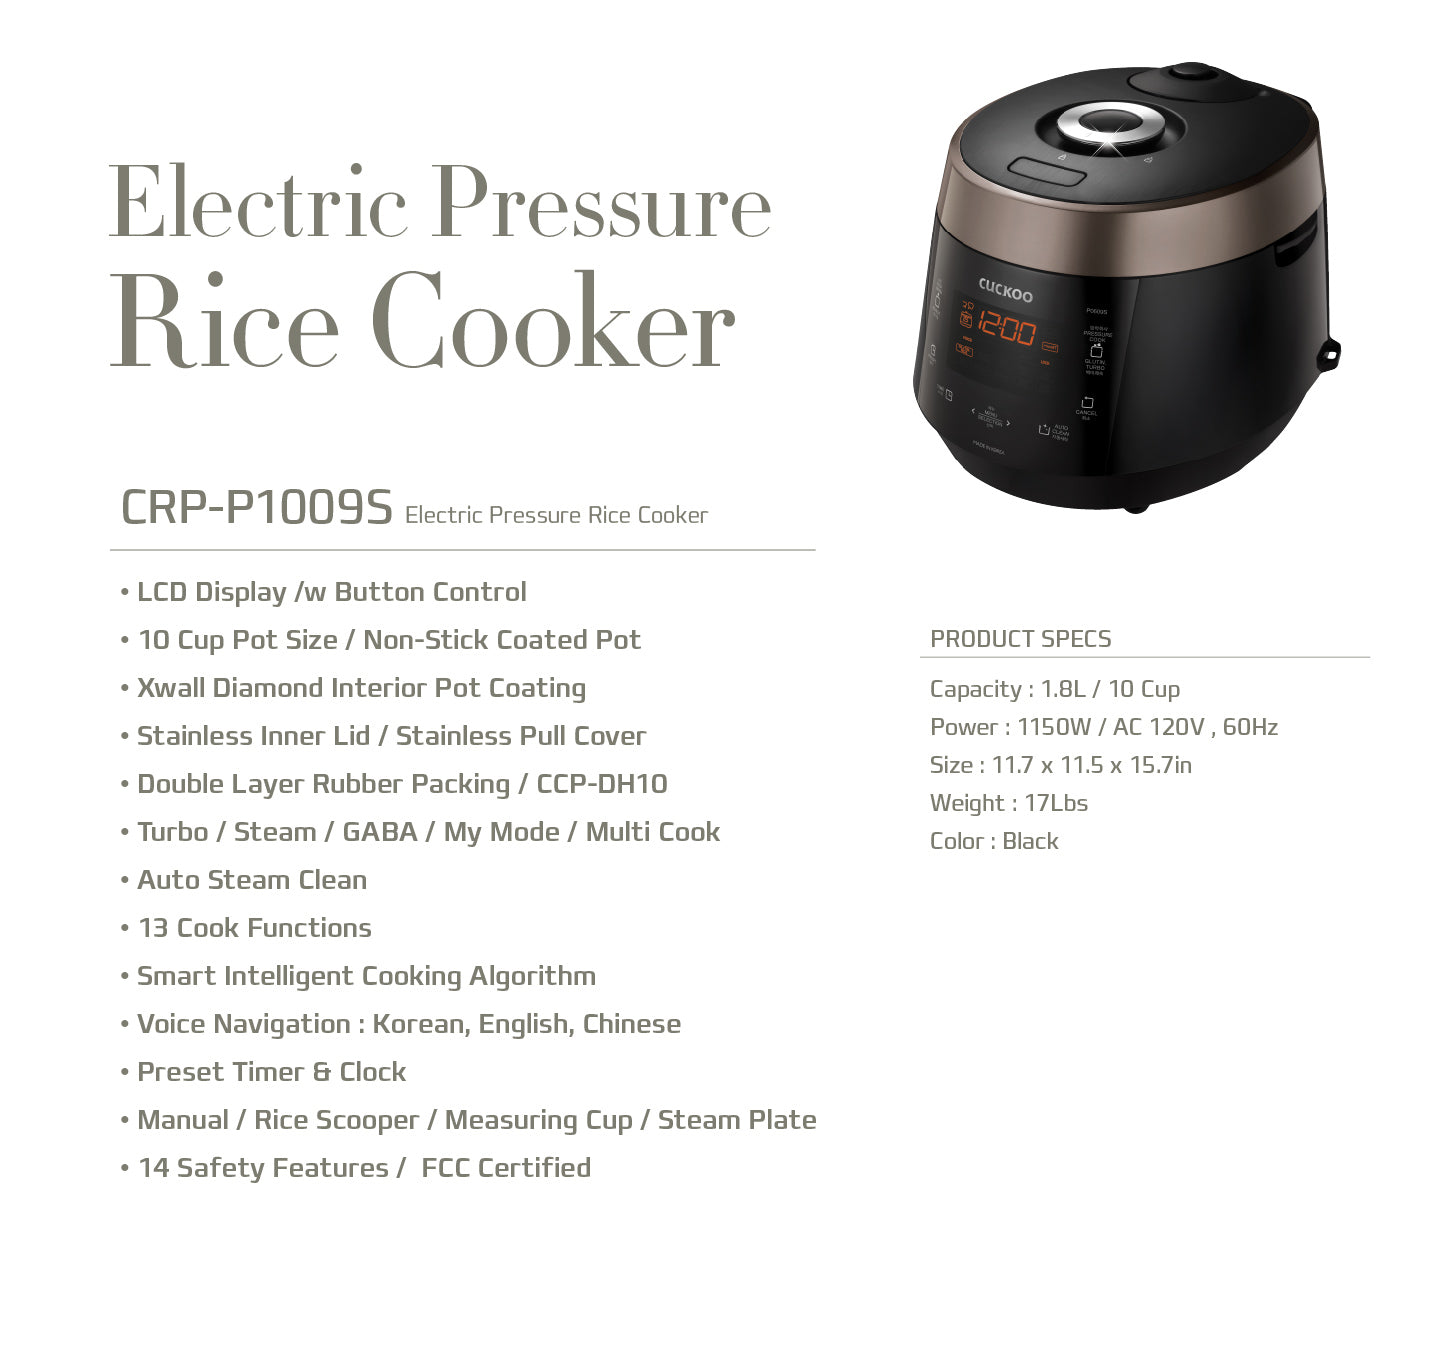  CRP-P1009SW 120V 10 Cup Electric Pressure Rice Cooker,  White